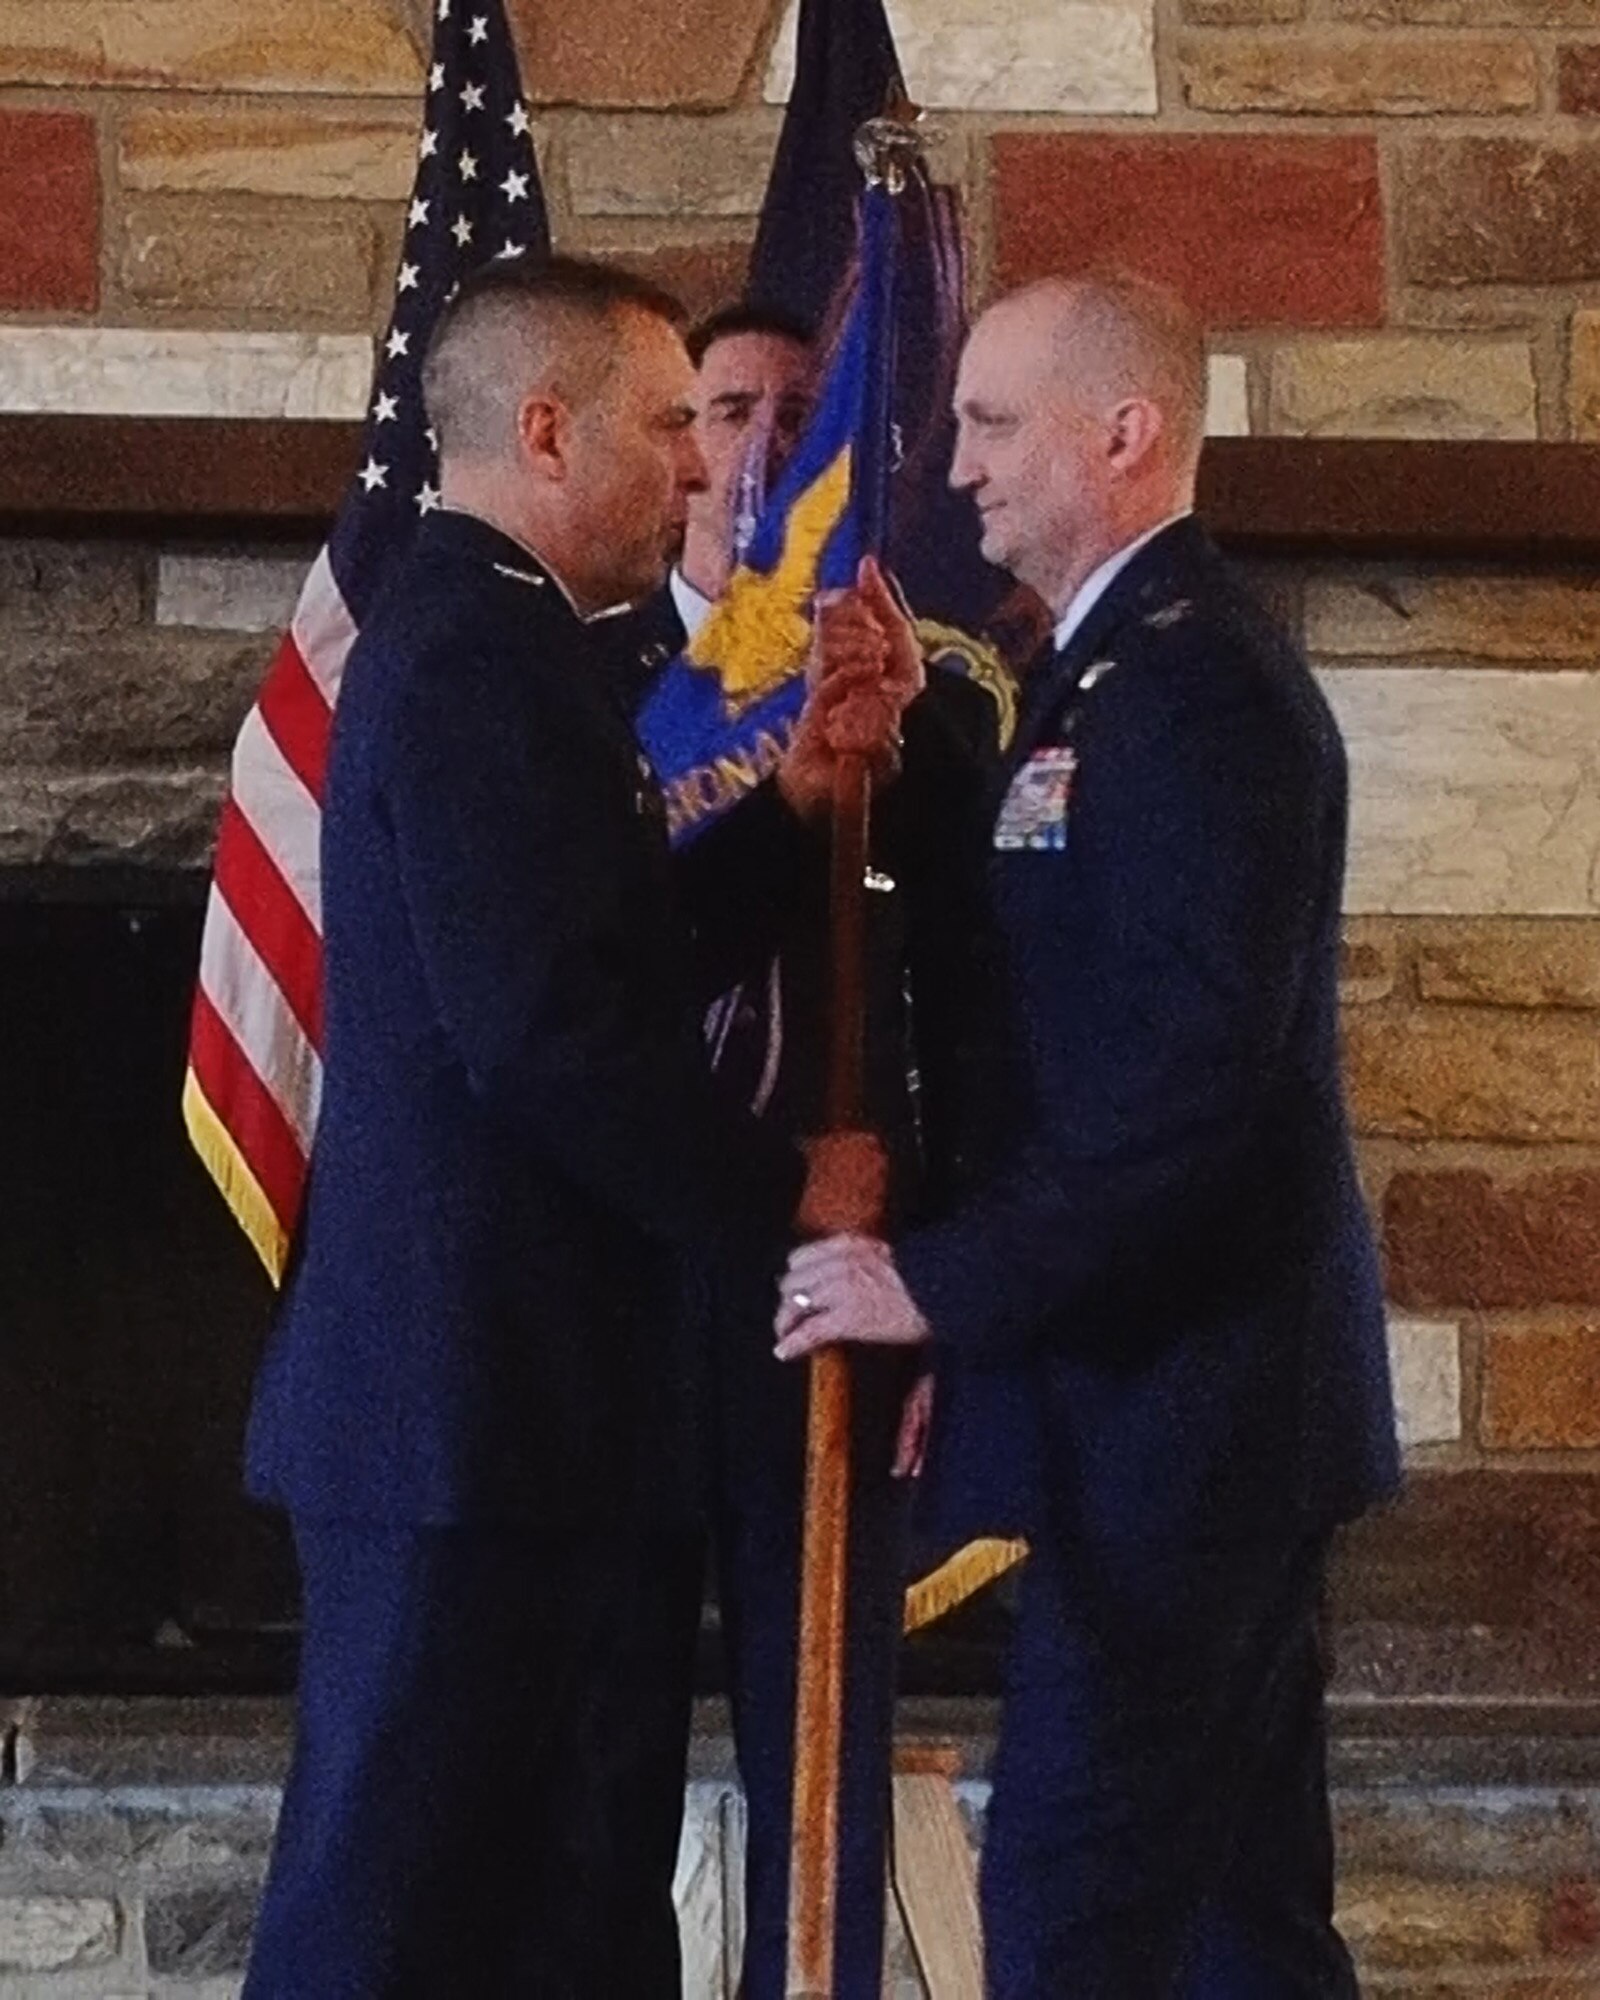 Col. Mike Cason (left), 193rd Special Operations Wing commander, presents the guidon to Col. Stacey Zdanavage (right), the new 193rd Regional Support Group commander, during an assumption of command ceremony March 11, 2017, Annville, Pennsylvania. The ceremony began with his promotion, preliminary honors and ended with the symbolic passing of the guidon. (U.S. Air National Guard photo by Master Sgt. Matt Schwartz/Released)